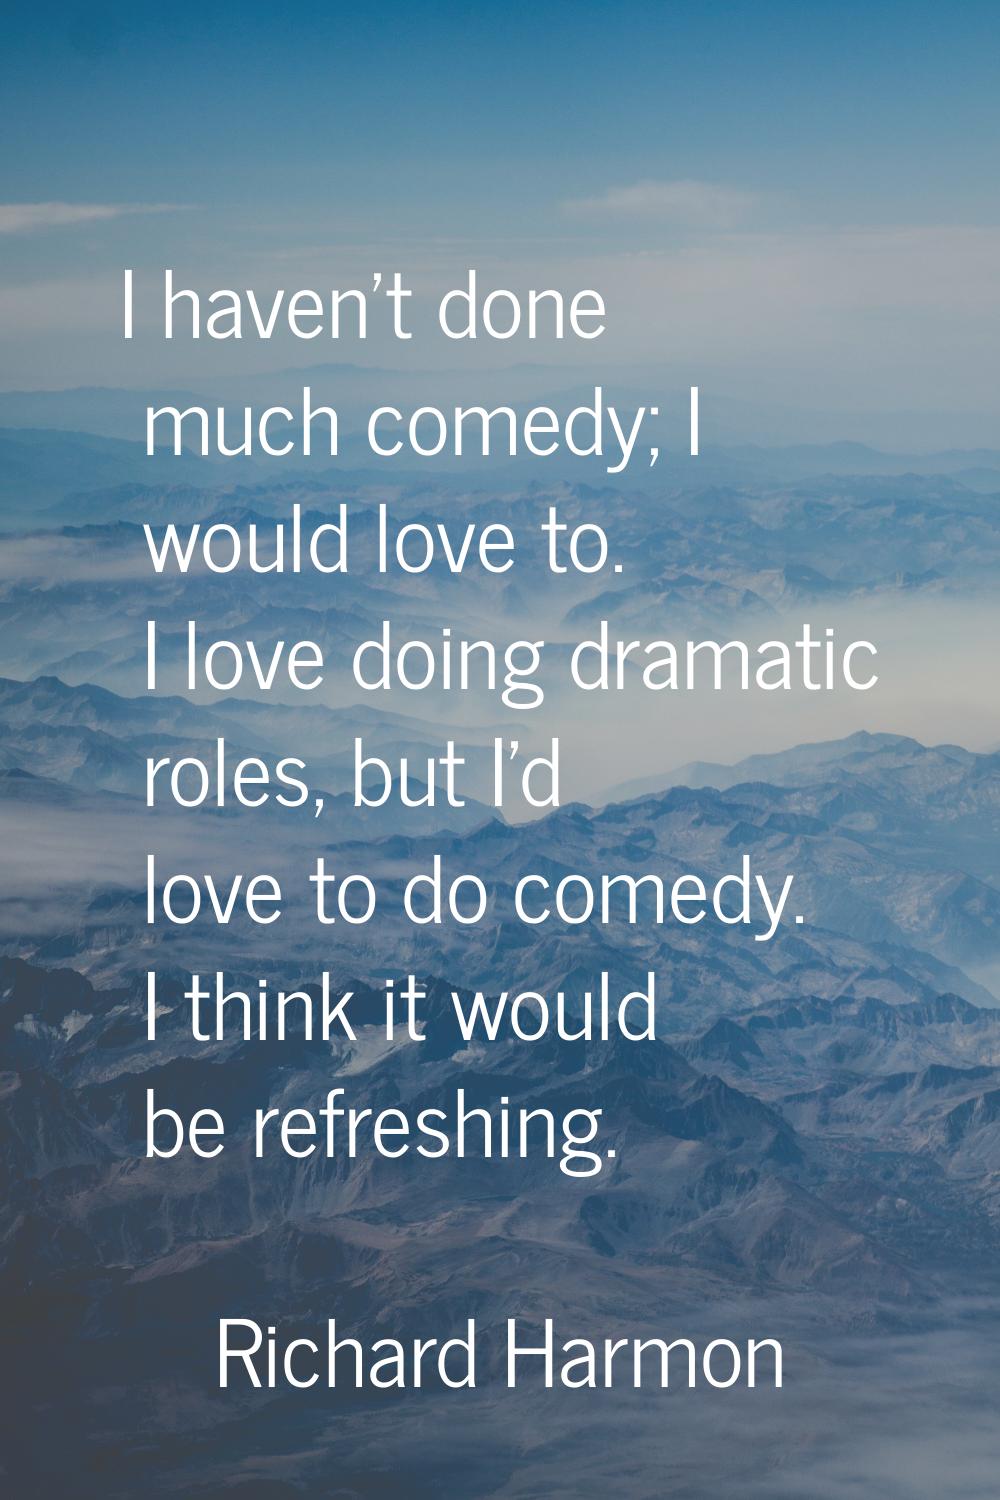 I haven't done much comedy; I would love to. I love doing dramatic roles, but I'd love to do comedy